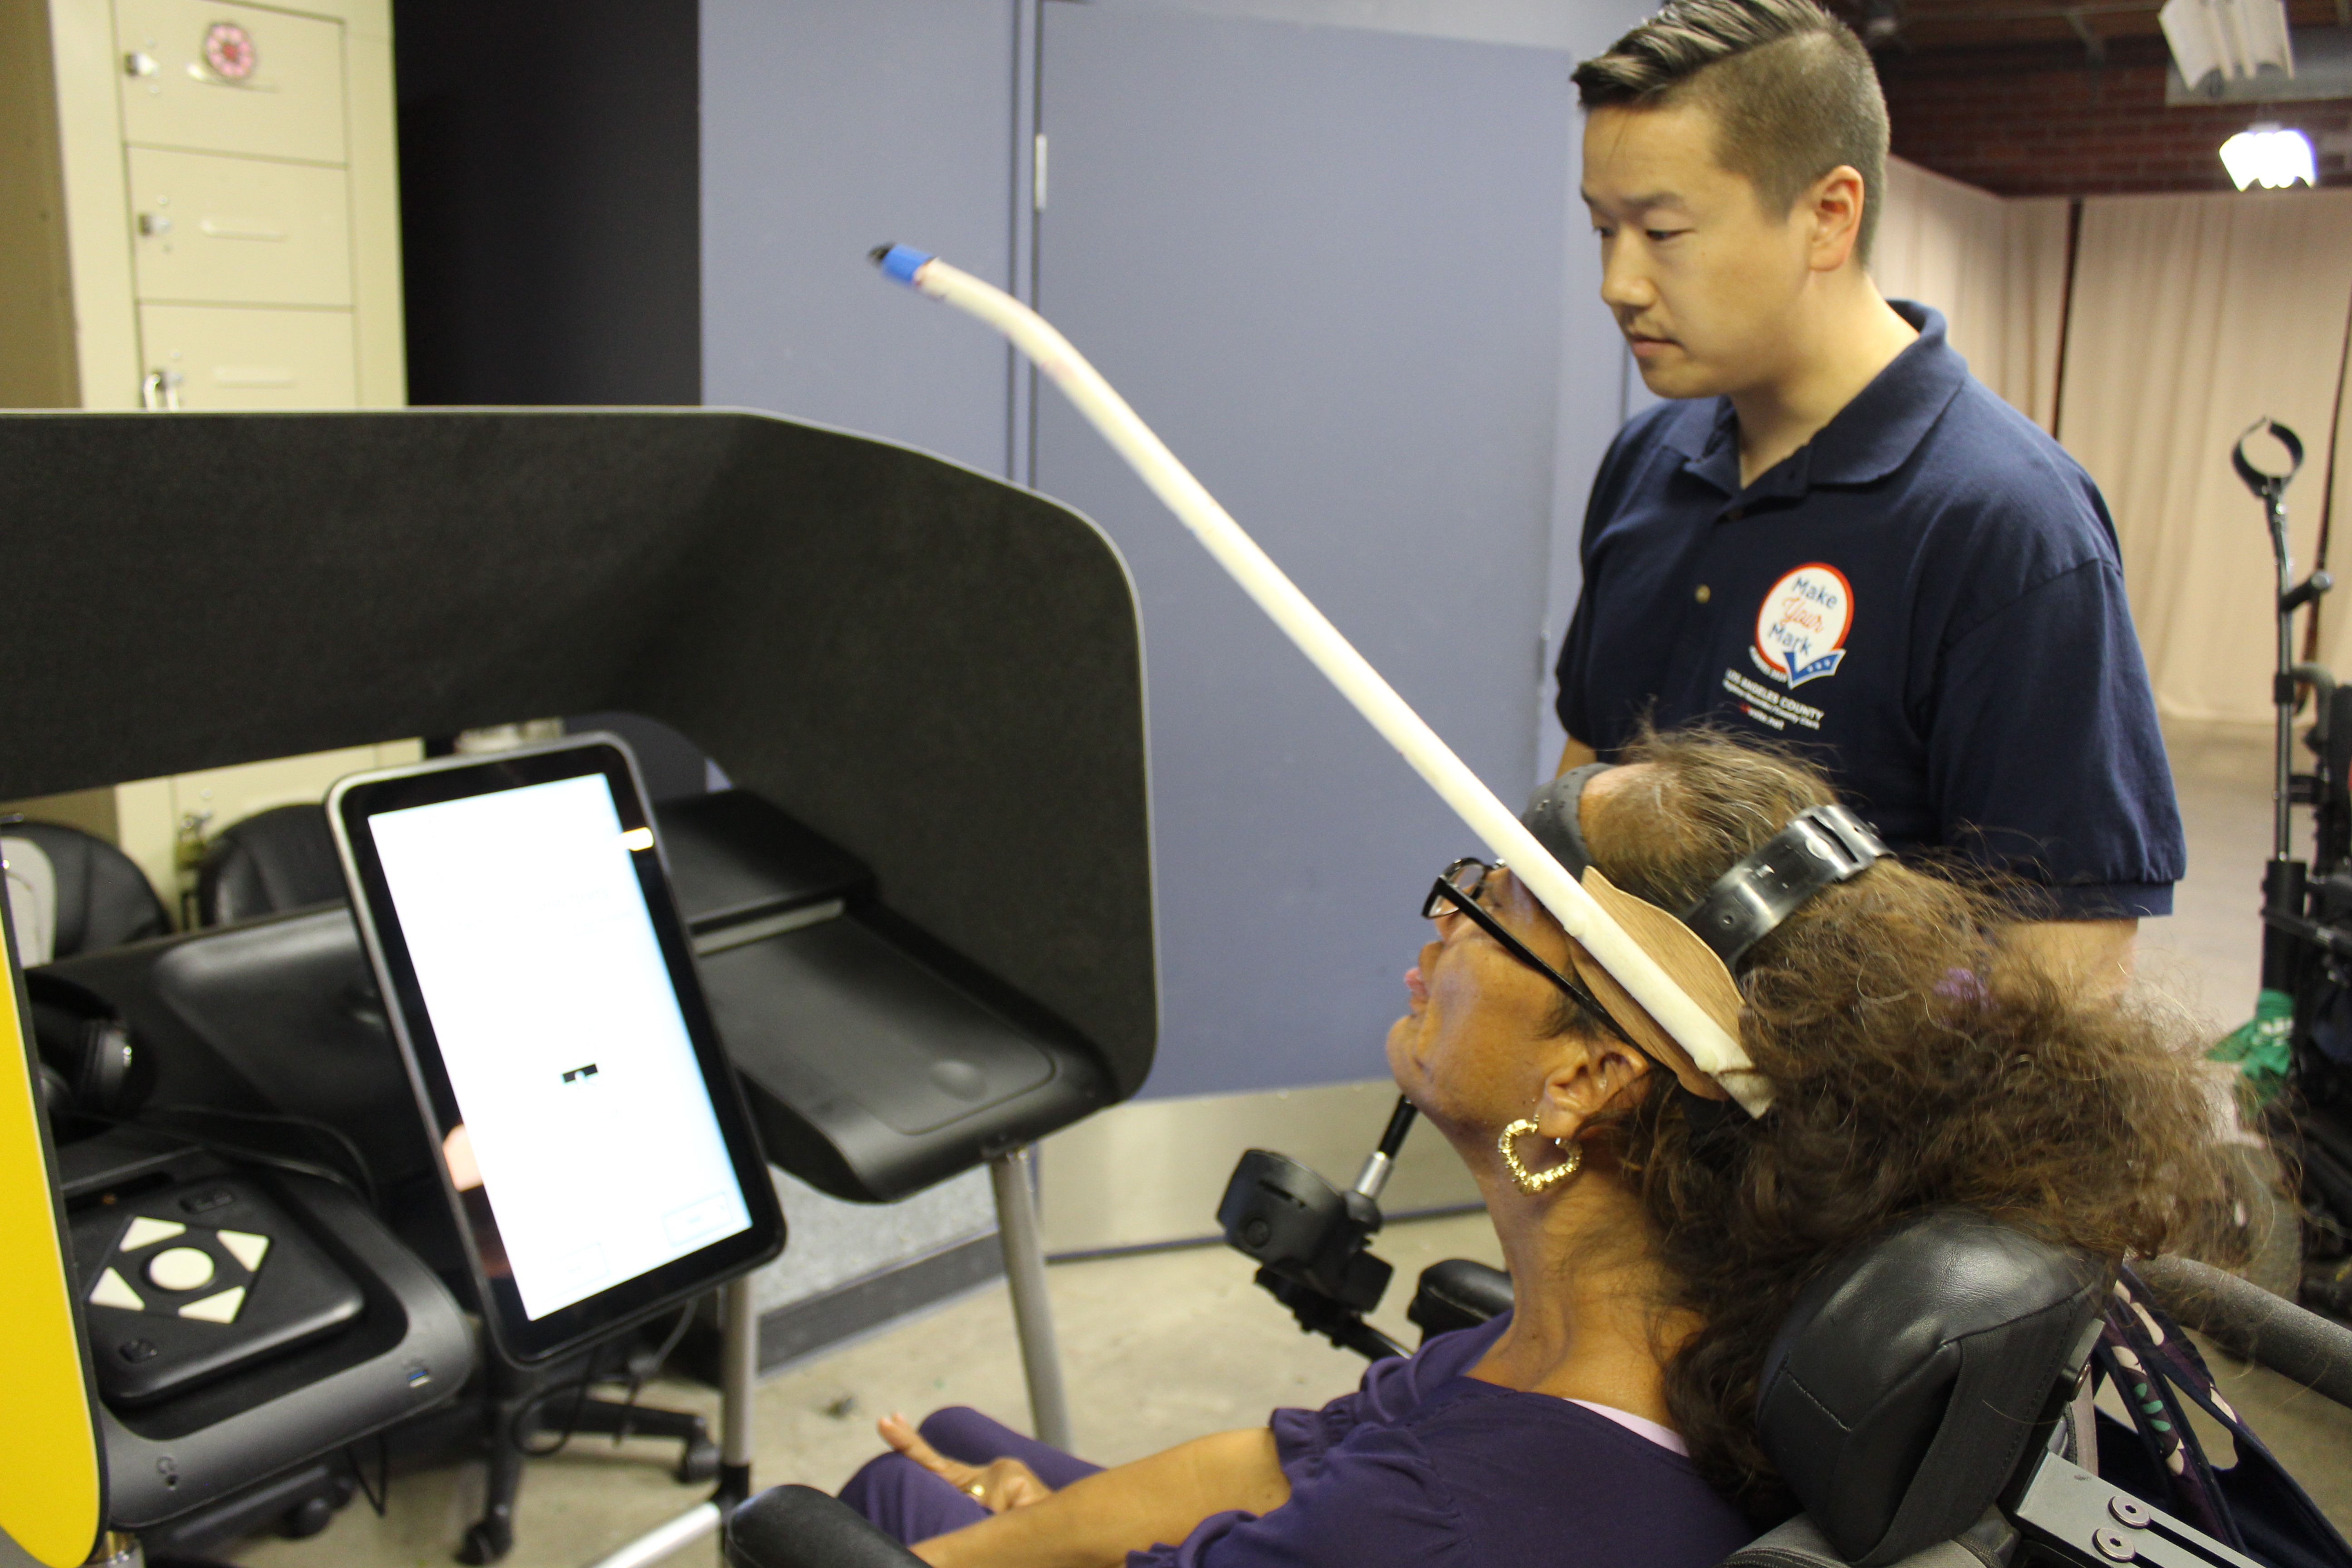 A self-advocate at UCPLA's Washington Place Adult Day Program uses an adaptive device to test an accessible voting prototype.